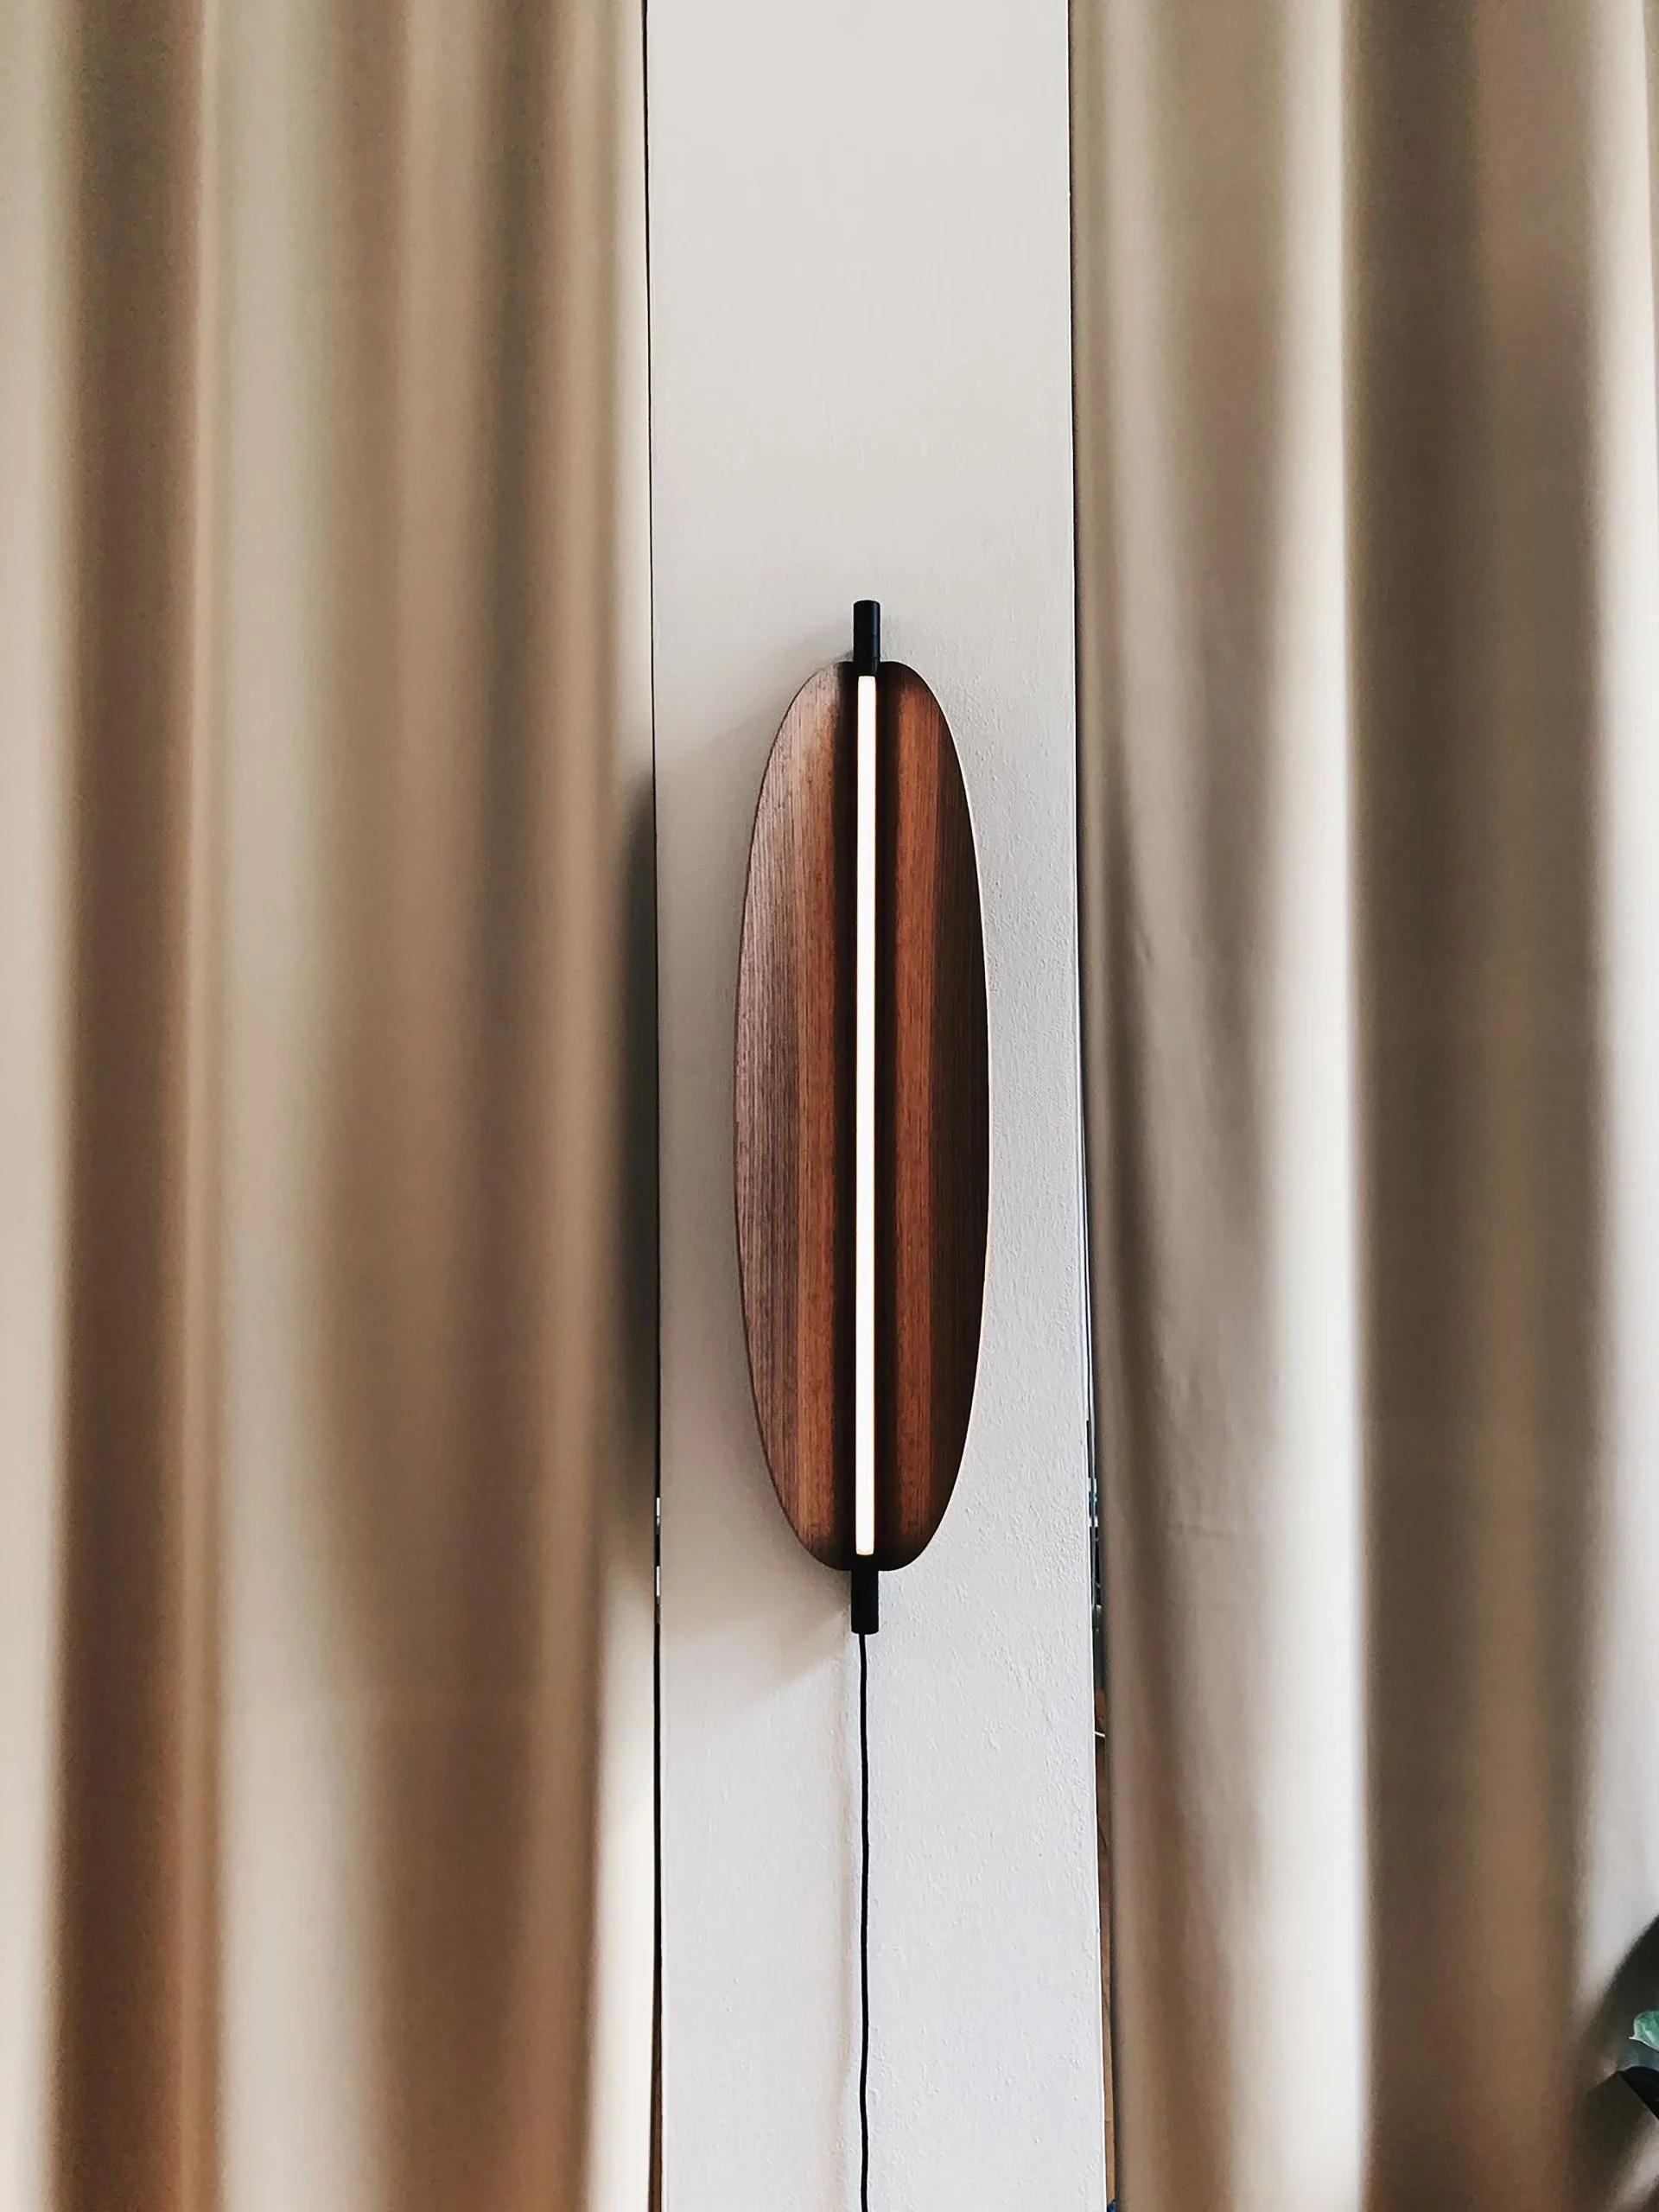 Thula 562.42 by Frederica Biasi x Tooy
Wall lamp
Compliant with USA electric system

Model shown: 
- hardware Sand black 
- details Satin nickel
- shade Canaletto walnut

Materials: aluminum, metal, leather, wood

The Thula wall lamps are based on a